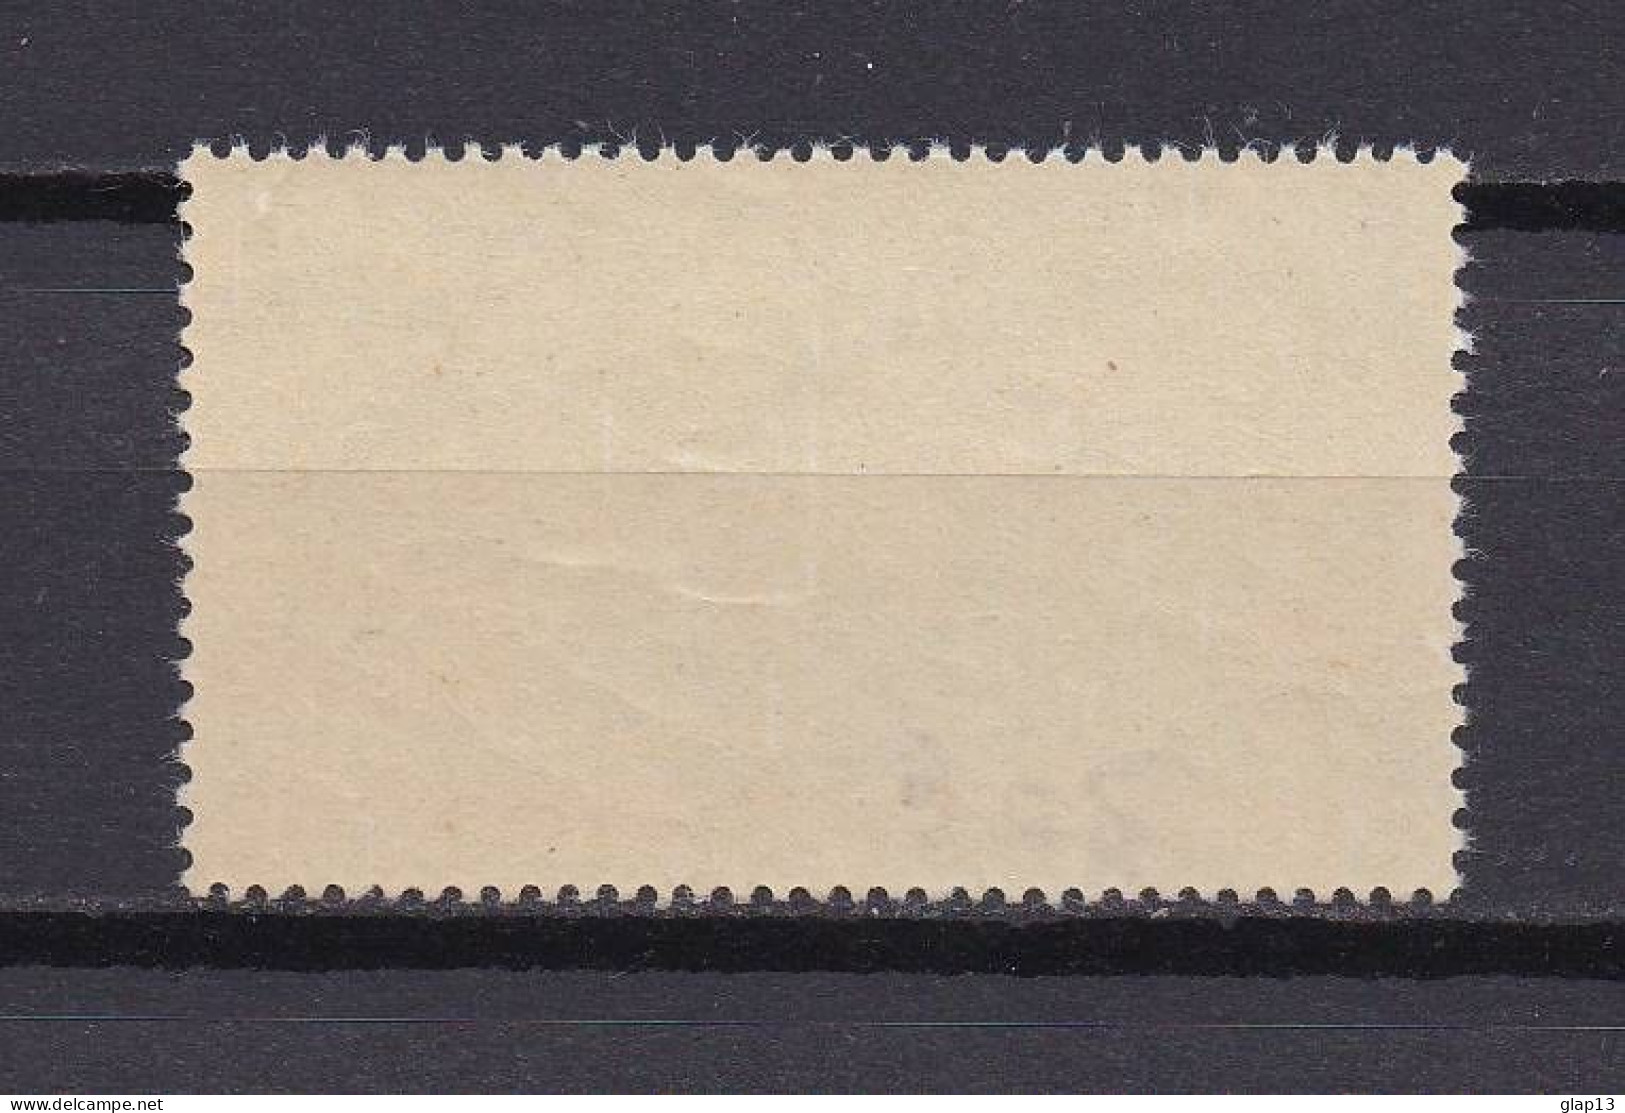 NOUVELLE-CALEDONIE 1962 TIMBRE N°305 NEUF AVEC CHARNIERE CONFERENCE - Neufs